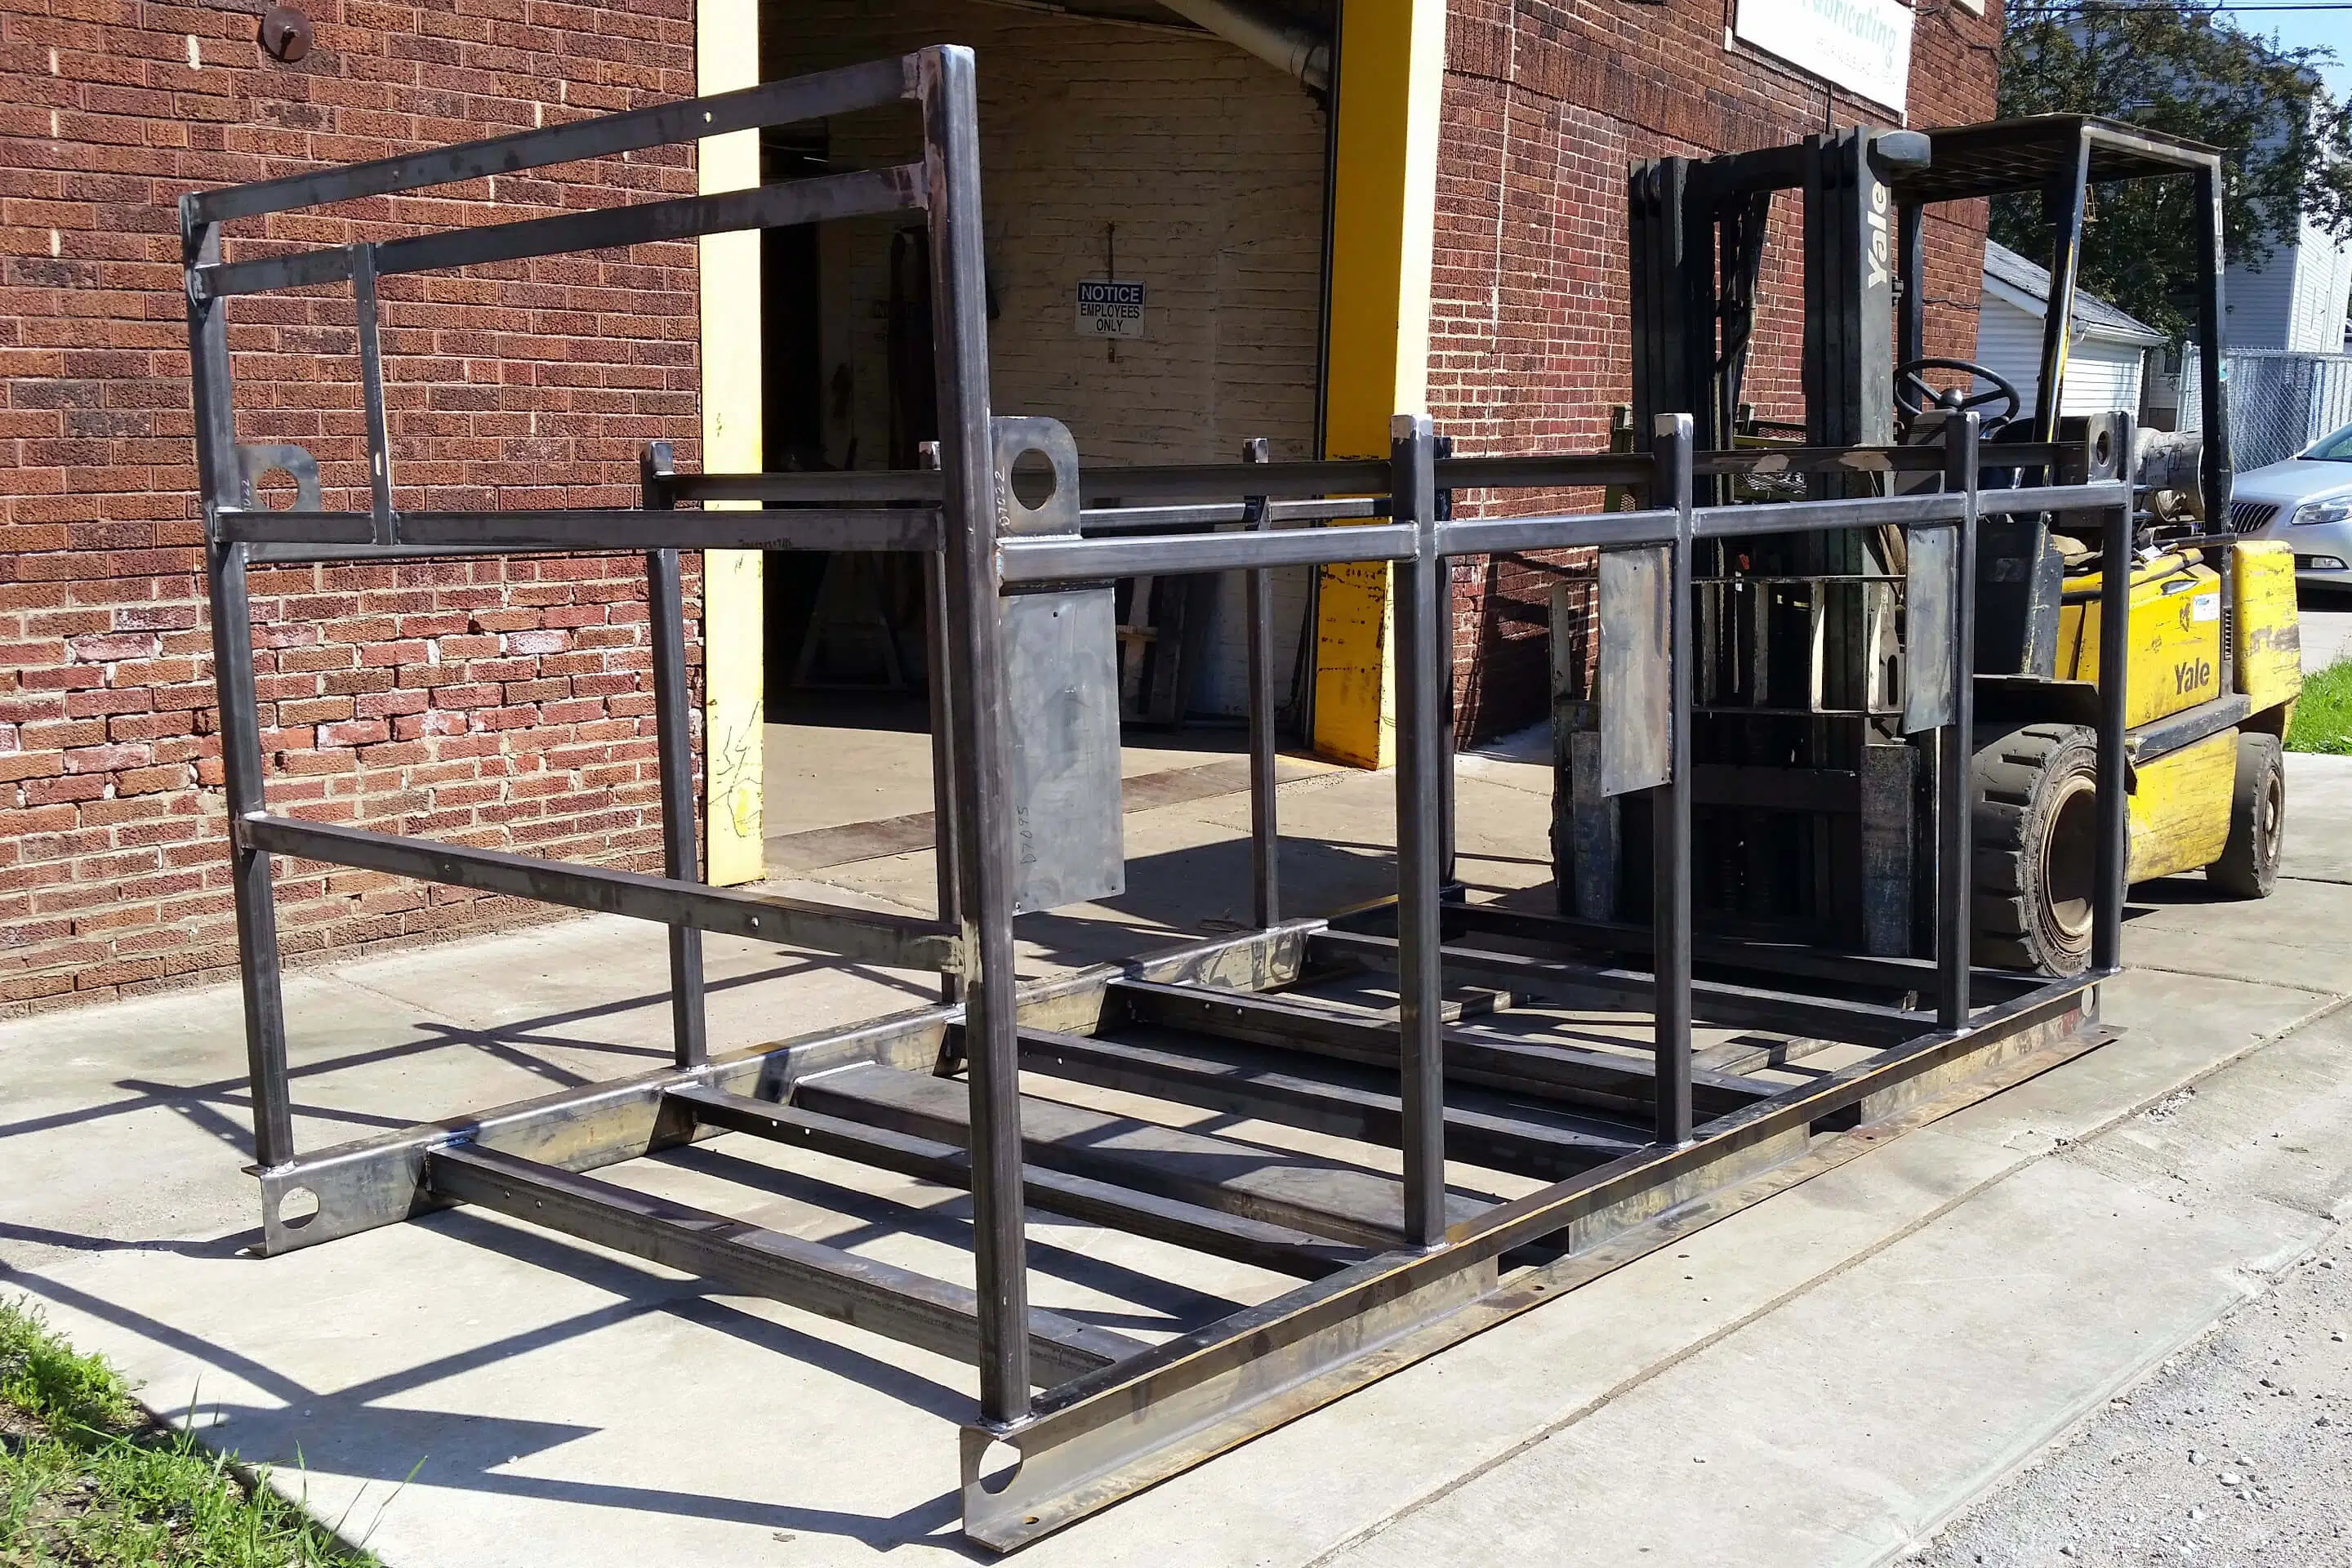 Forklift moving recently fabricated metal frame